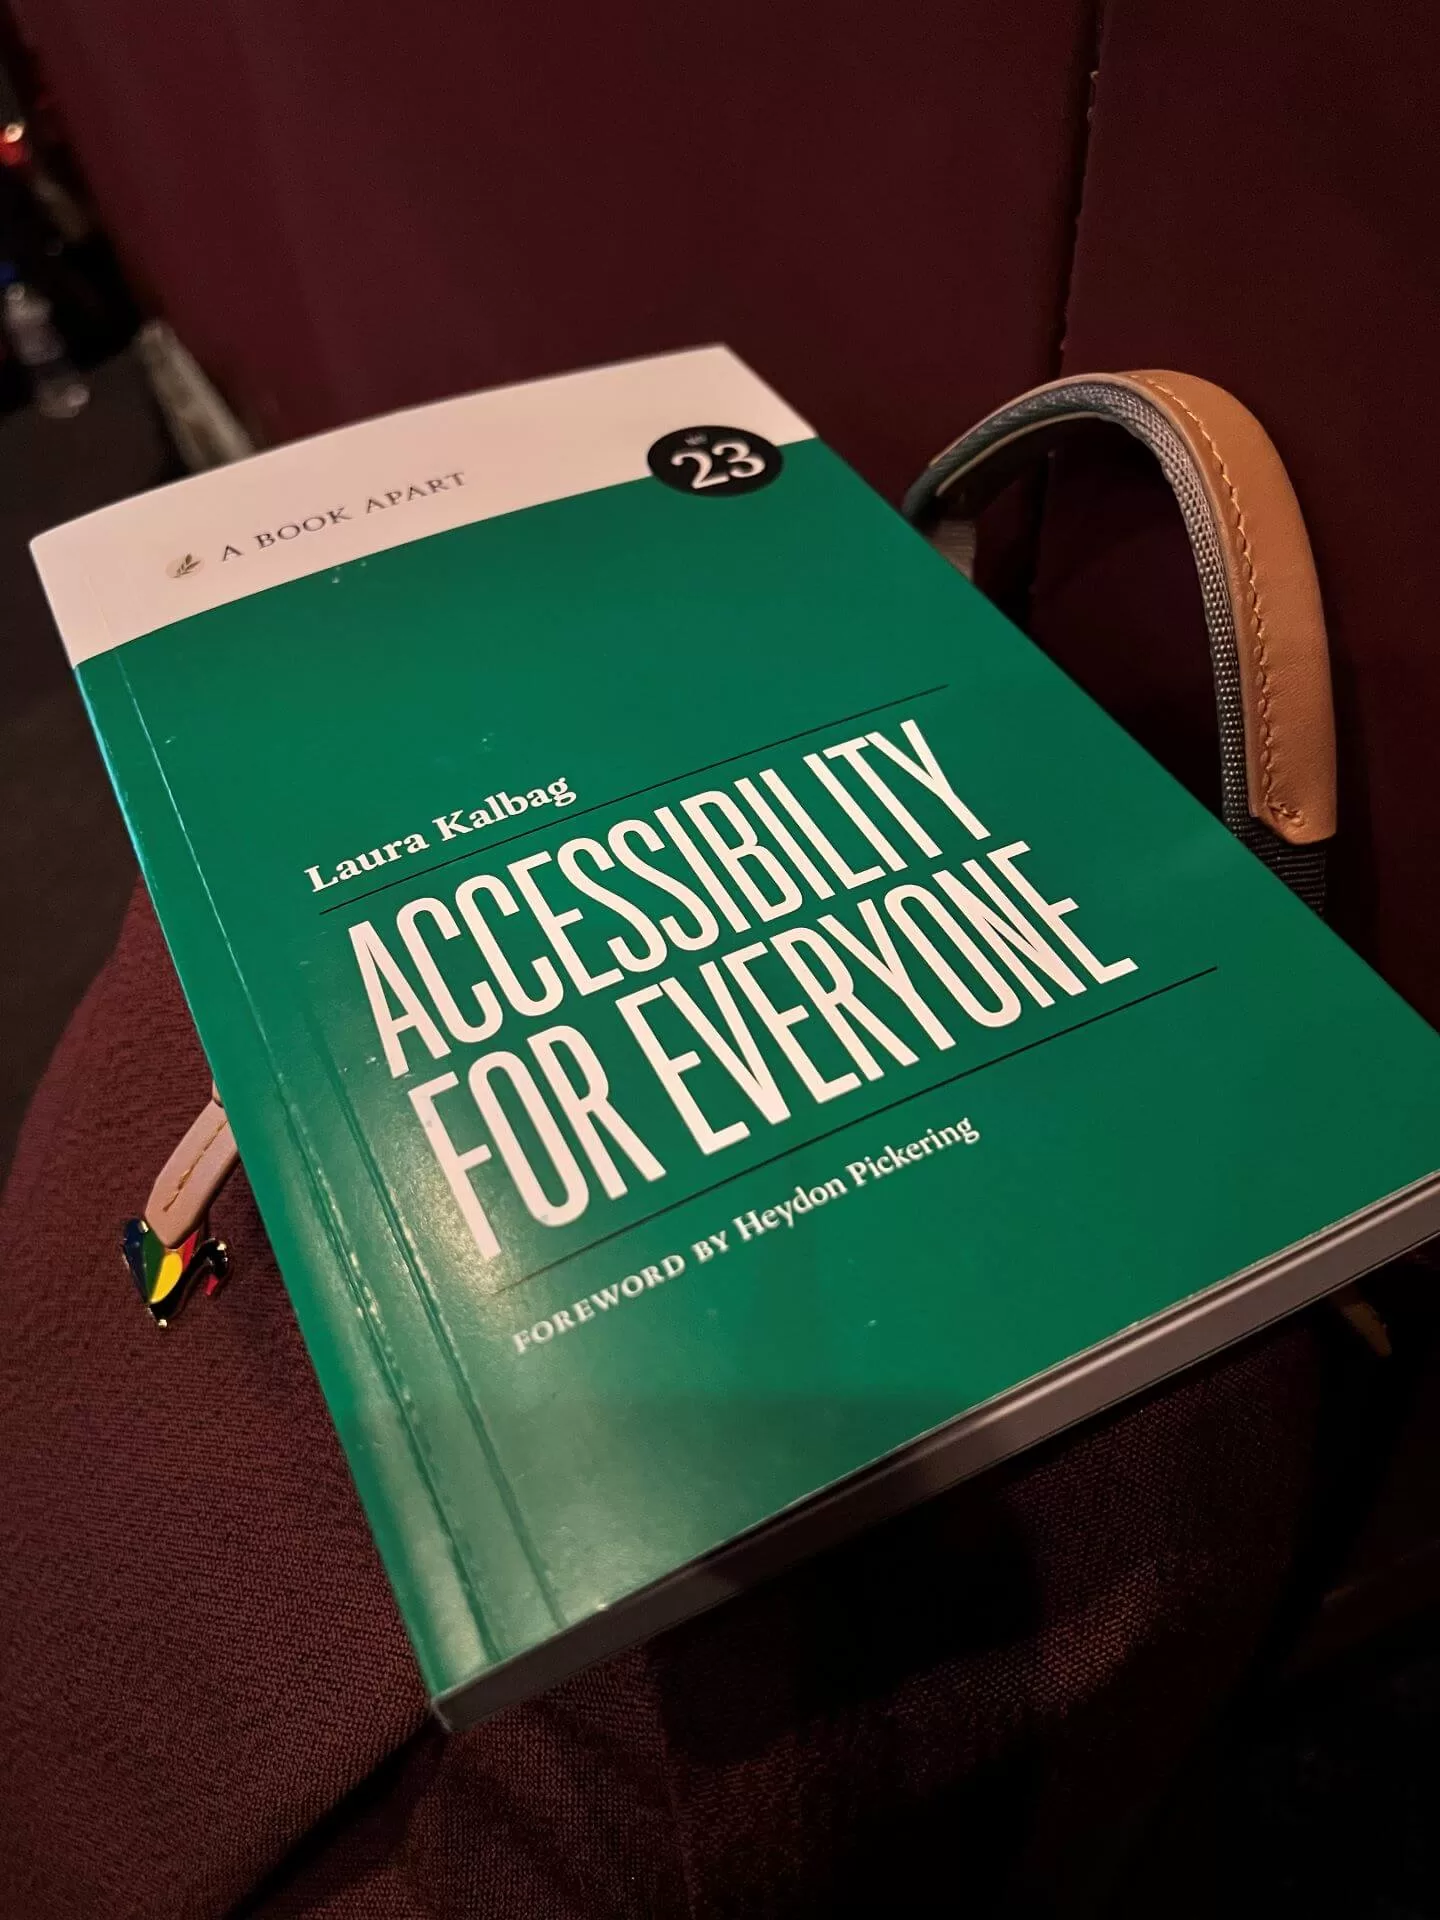 A photo of the book I won, "Accessibility for Everyone" by Laura Kalbag. It has a green cover and is resting on my backpack.